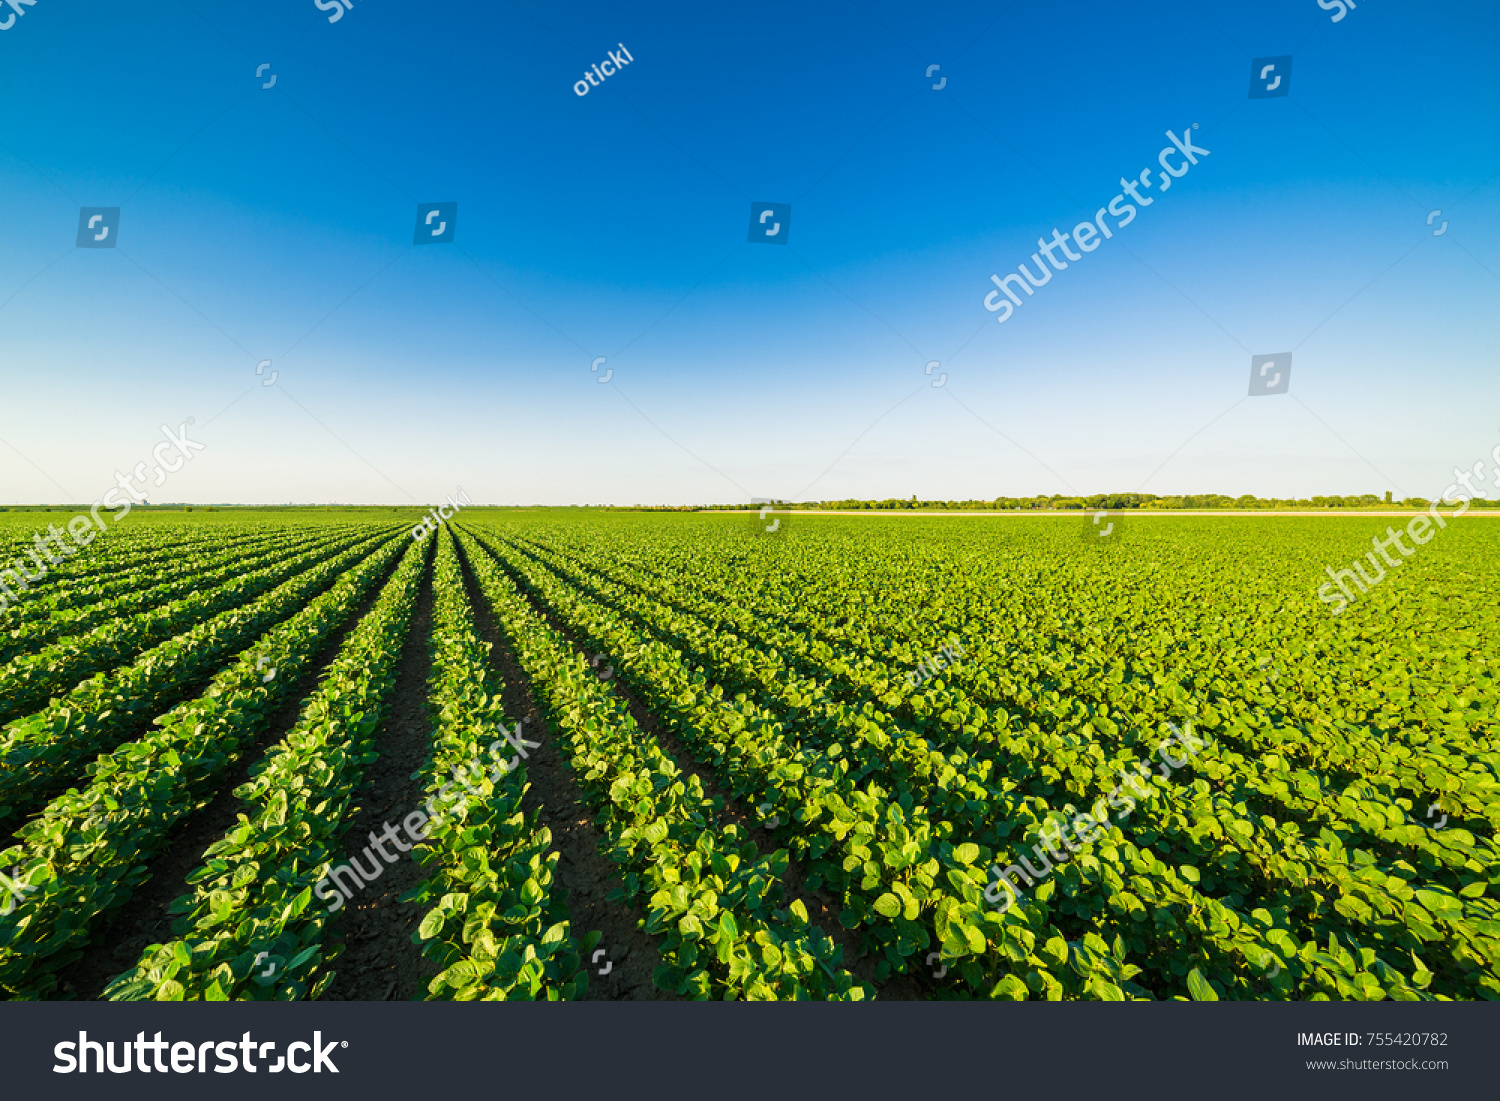 Green ripening soybean field, agricultural landscape #755420782